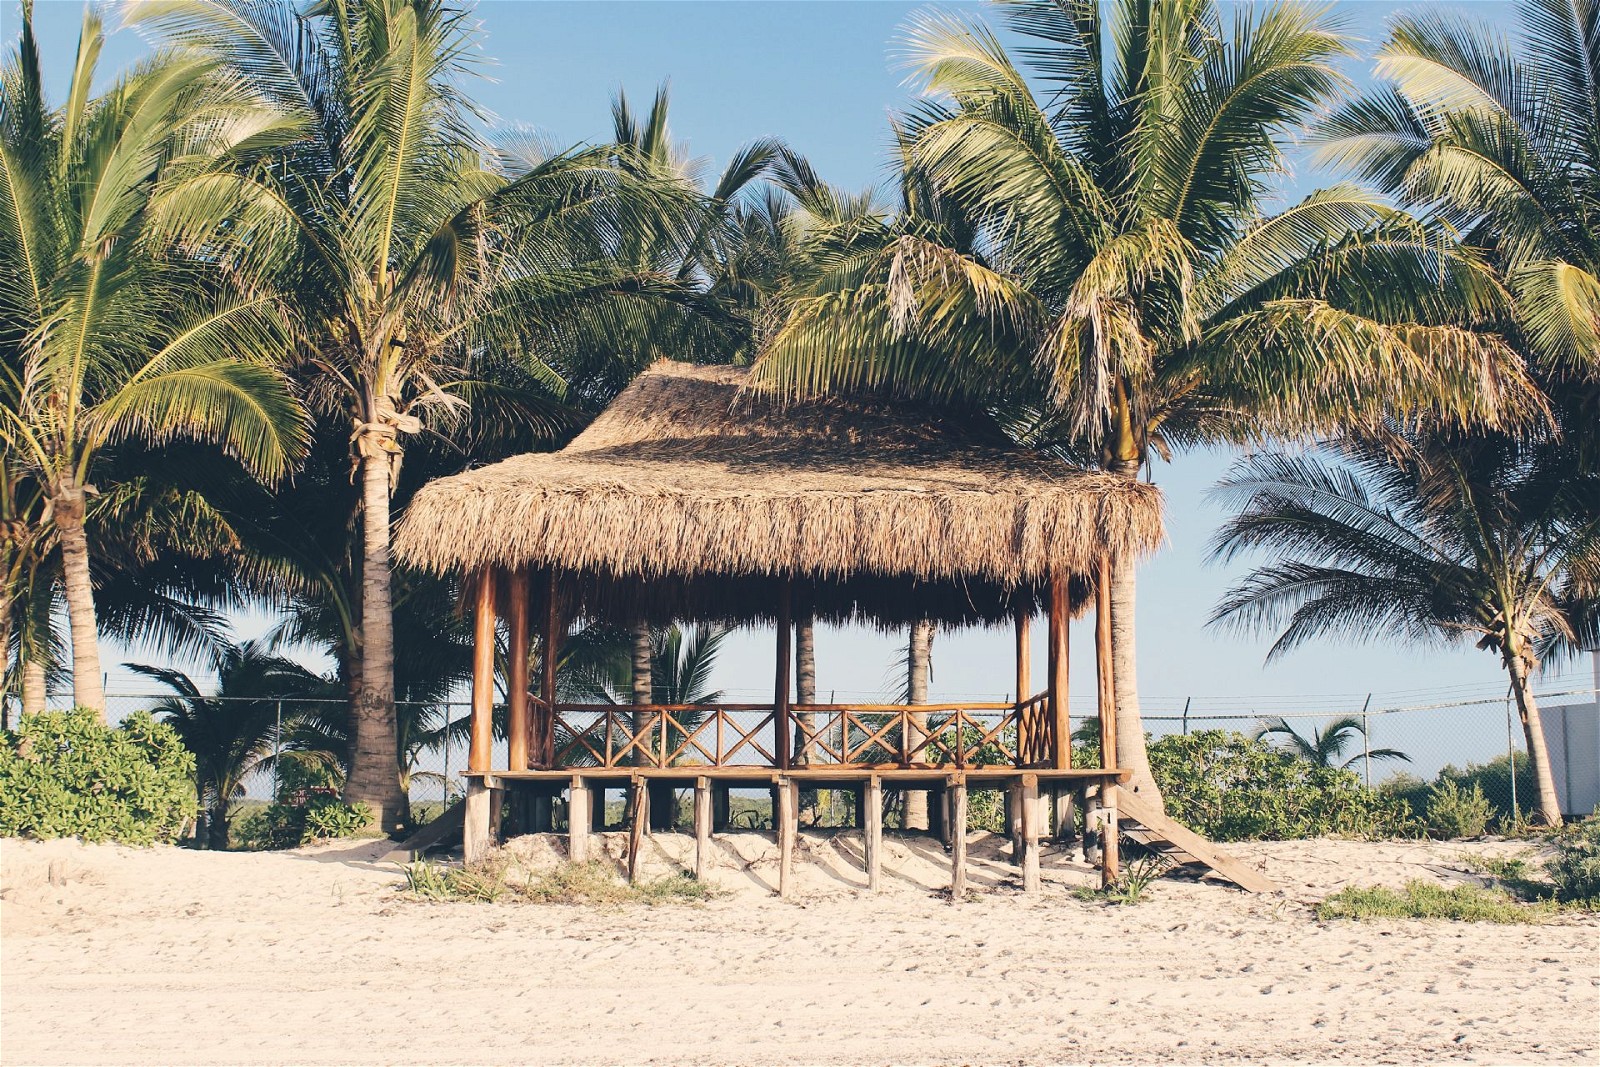 For travelers seeking a more intimate and unique experience, boutique hotels in Playa del Carmen are an excellent choice